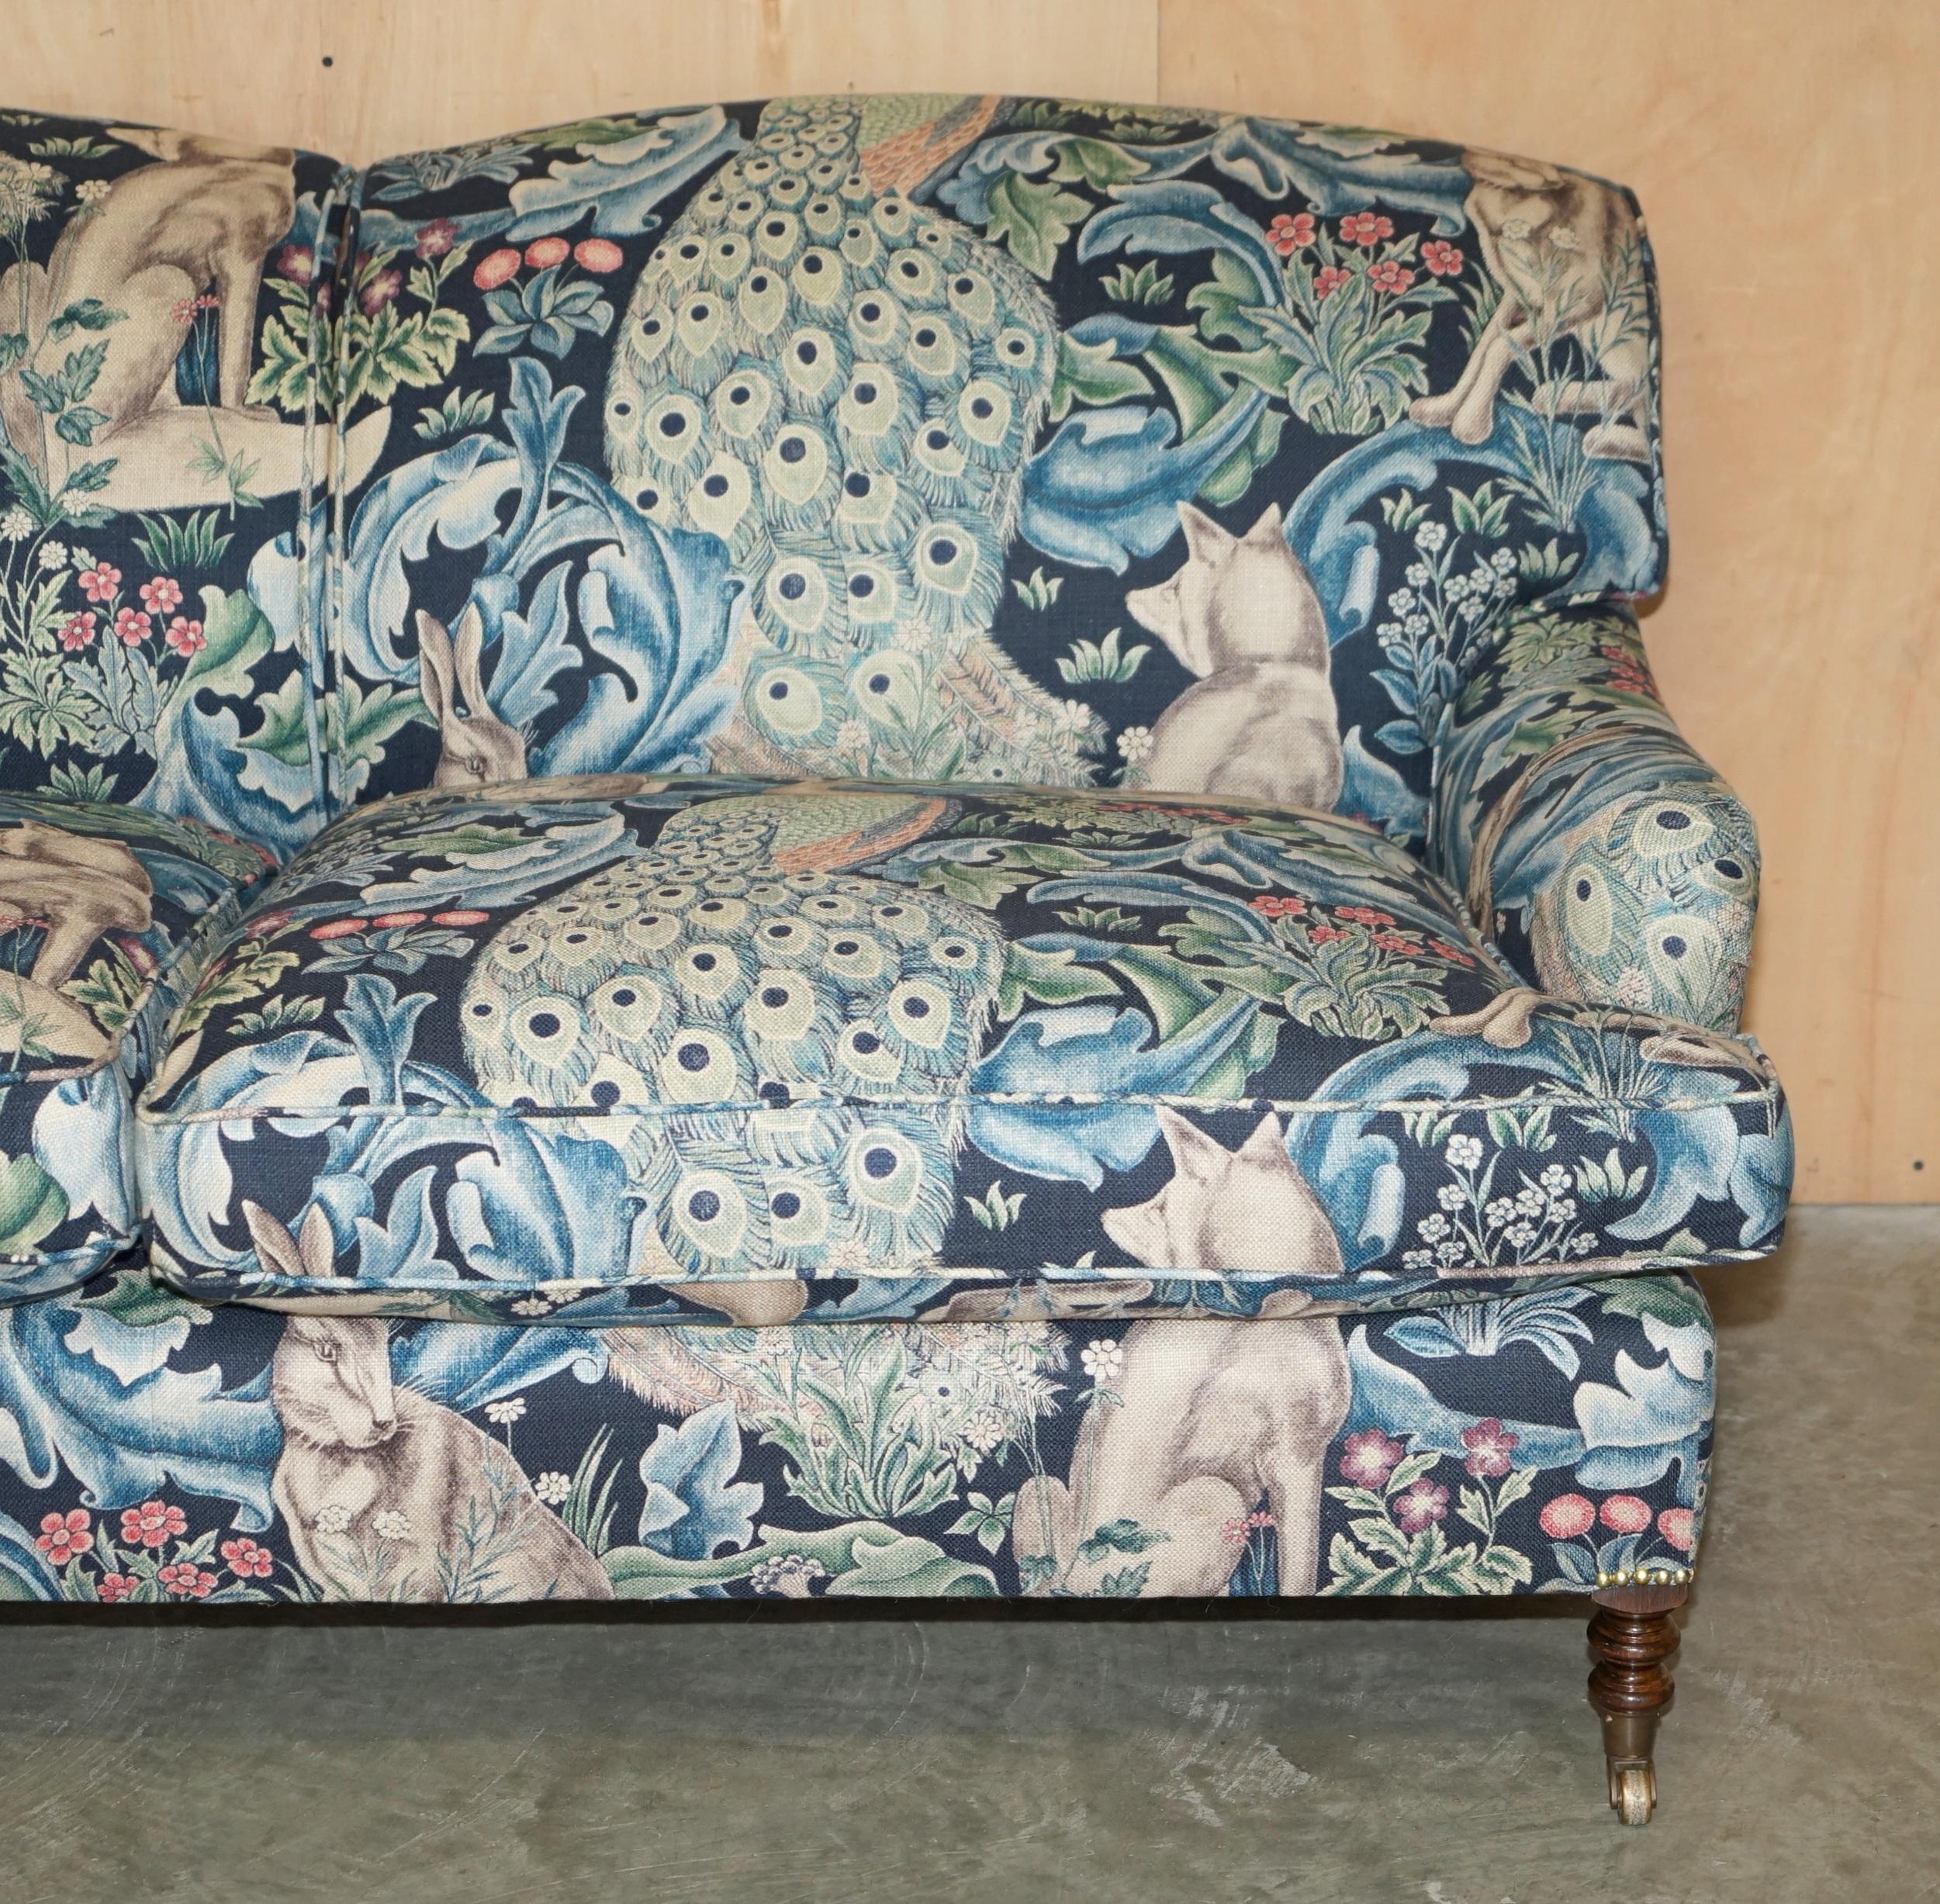  GEORGE SMiTH HOWARD & SON'S WILLIAM MORRIS SOFA ARMCHAIR SUITE (Polster) im Angebot